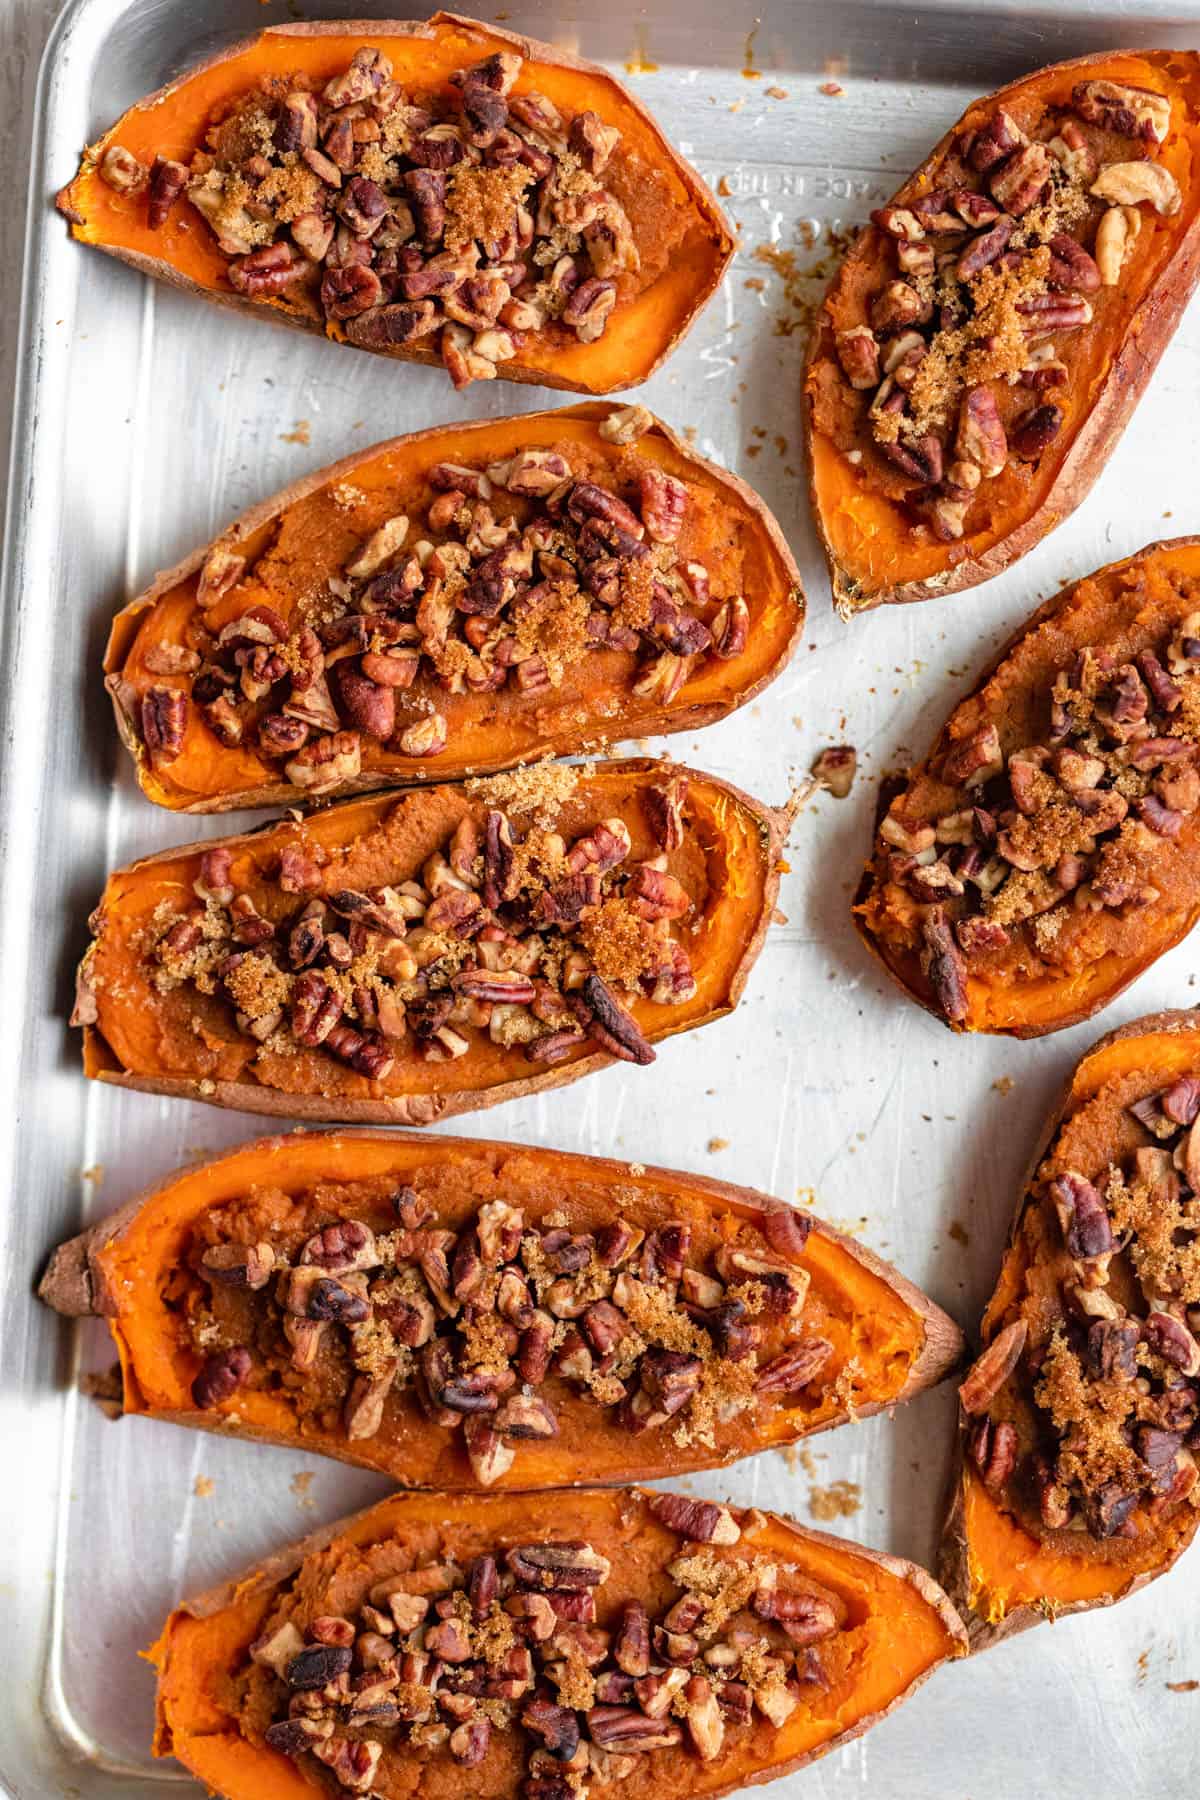 Twice baked sweet potatoes on a baking dish with parchment paper after baking